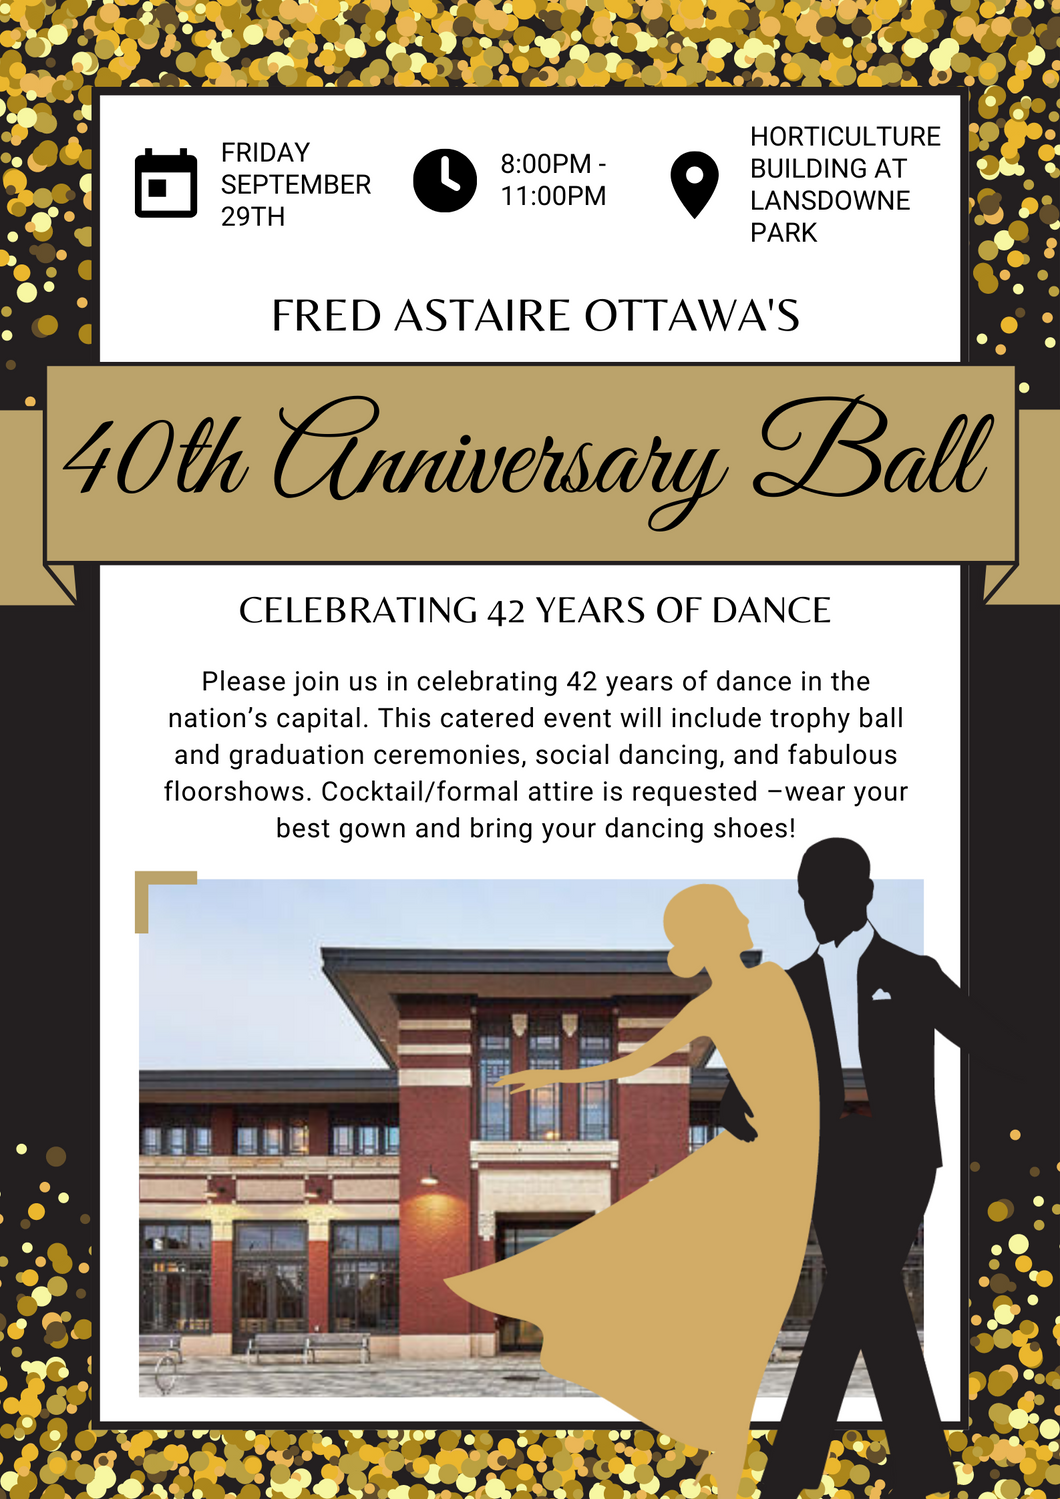 Ticket for Fred Astaire Ottawa's 40th Anniversary Ball